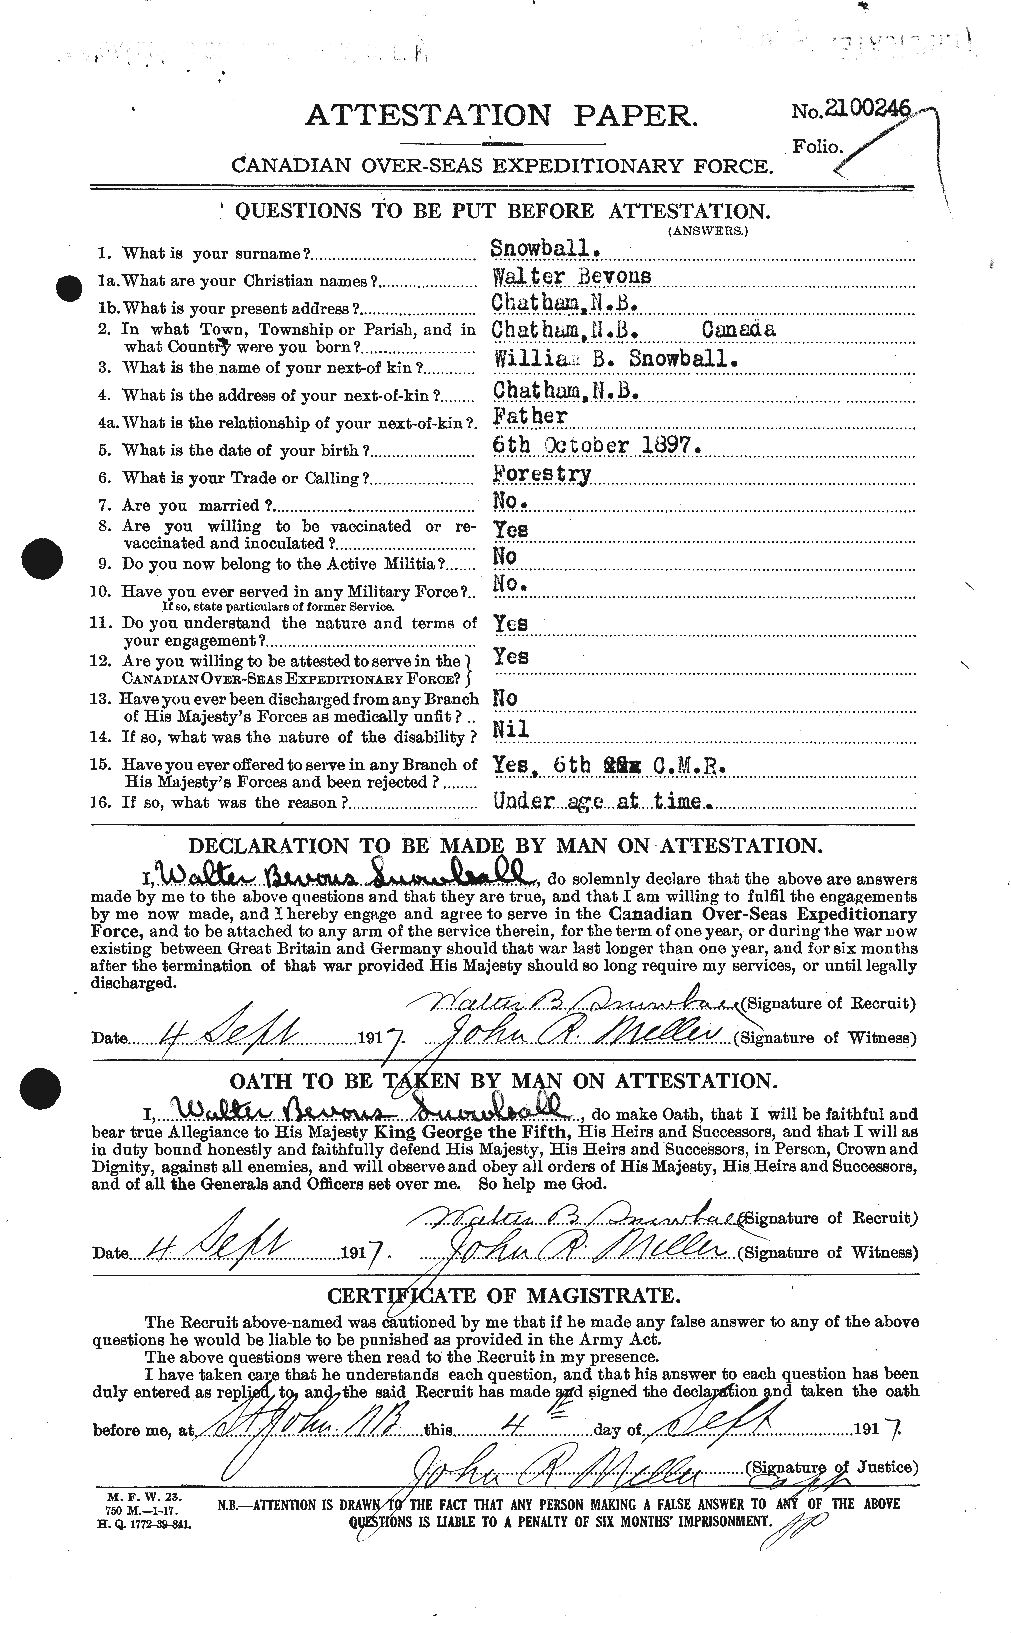 Personnel Records of the First World War - CEF 108508a